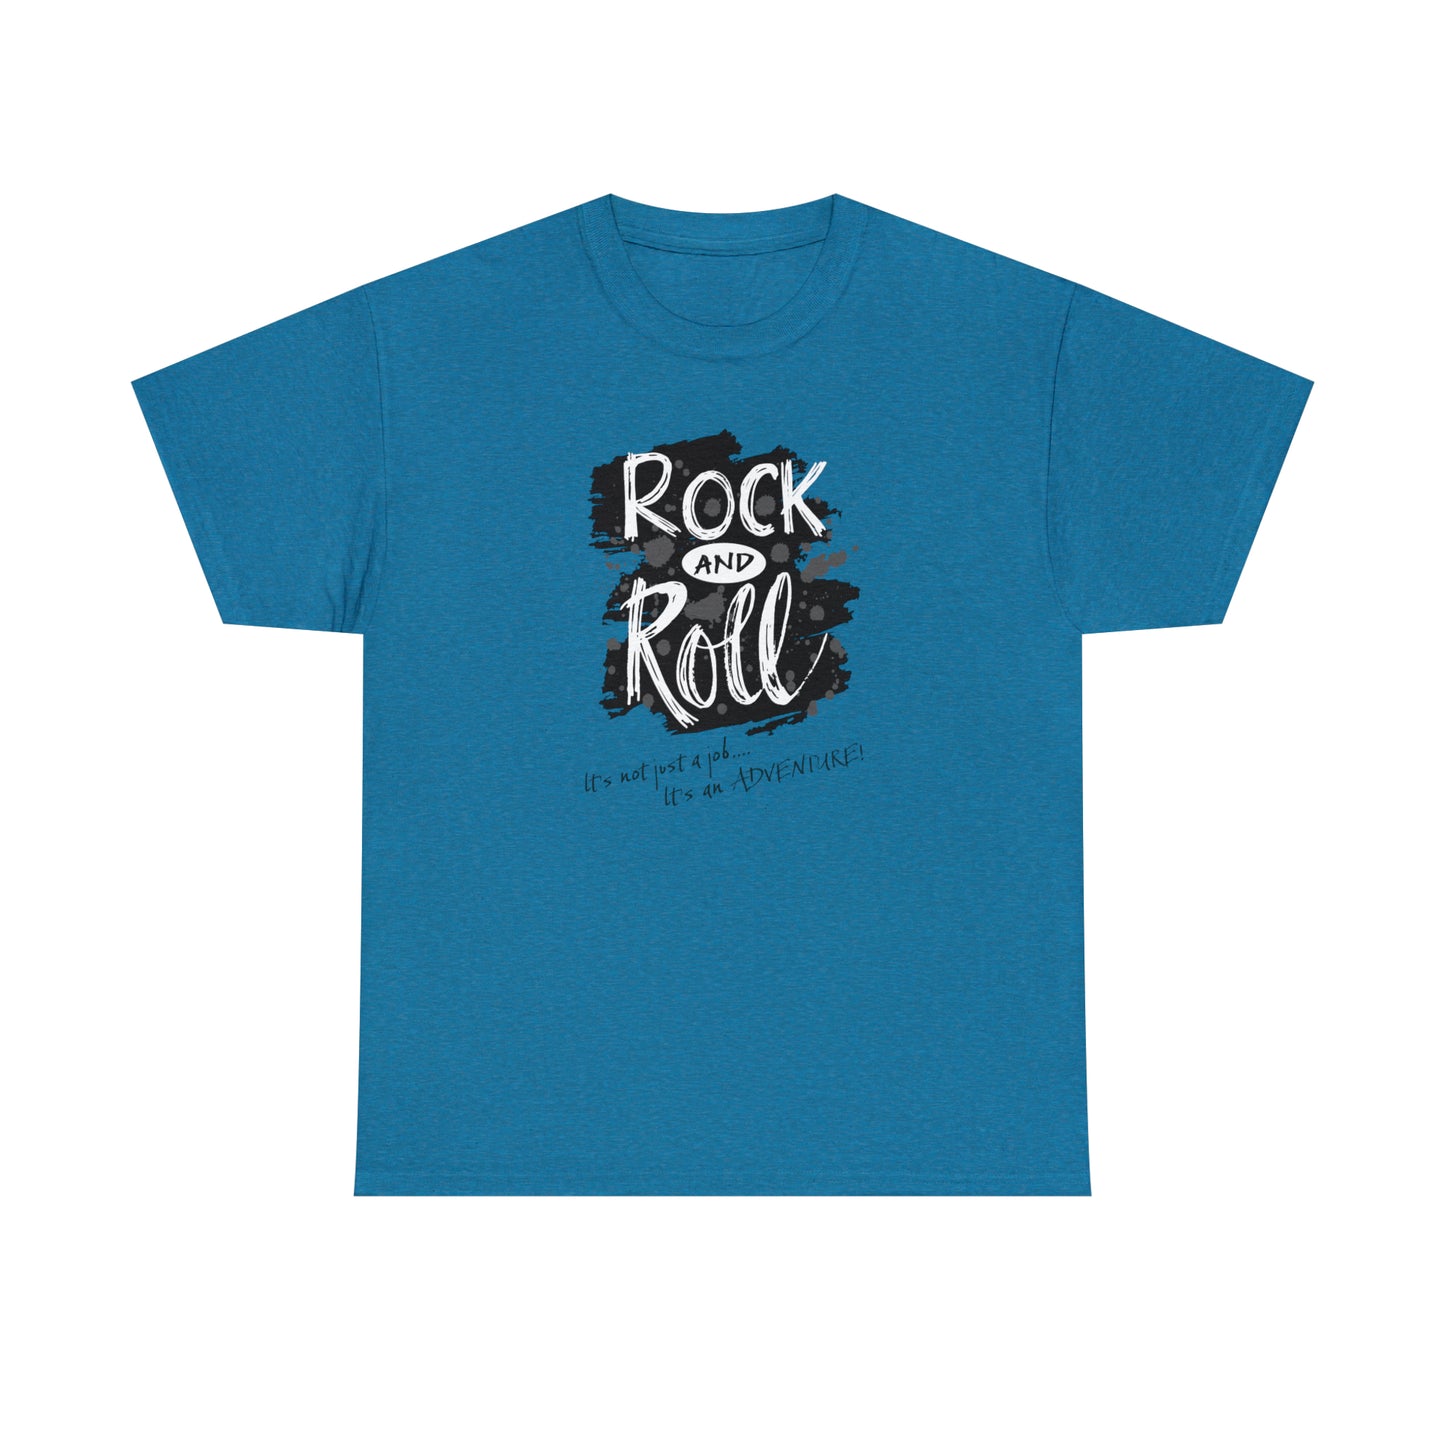 Rock and Roll T-Shirt For Adventure T Shirt For Musician TShirt For Music Shirt For Live Music Shirt For Band Tee For Musician Gift For Music Gift